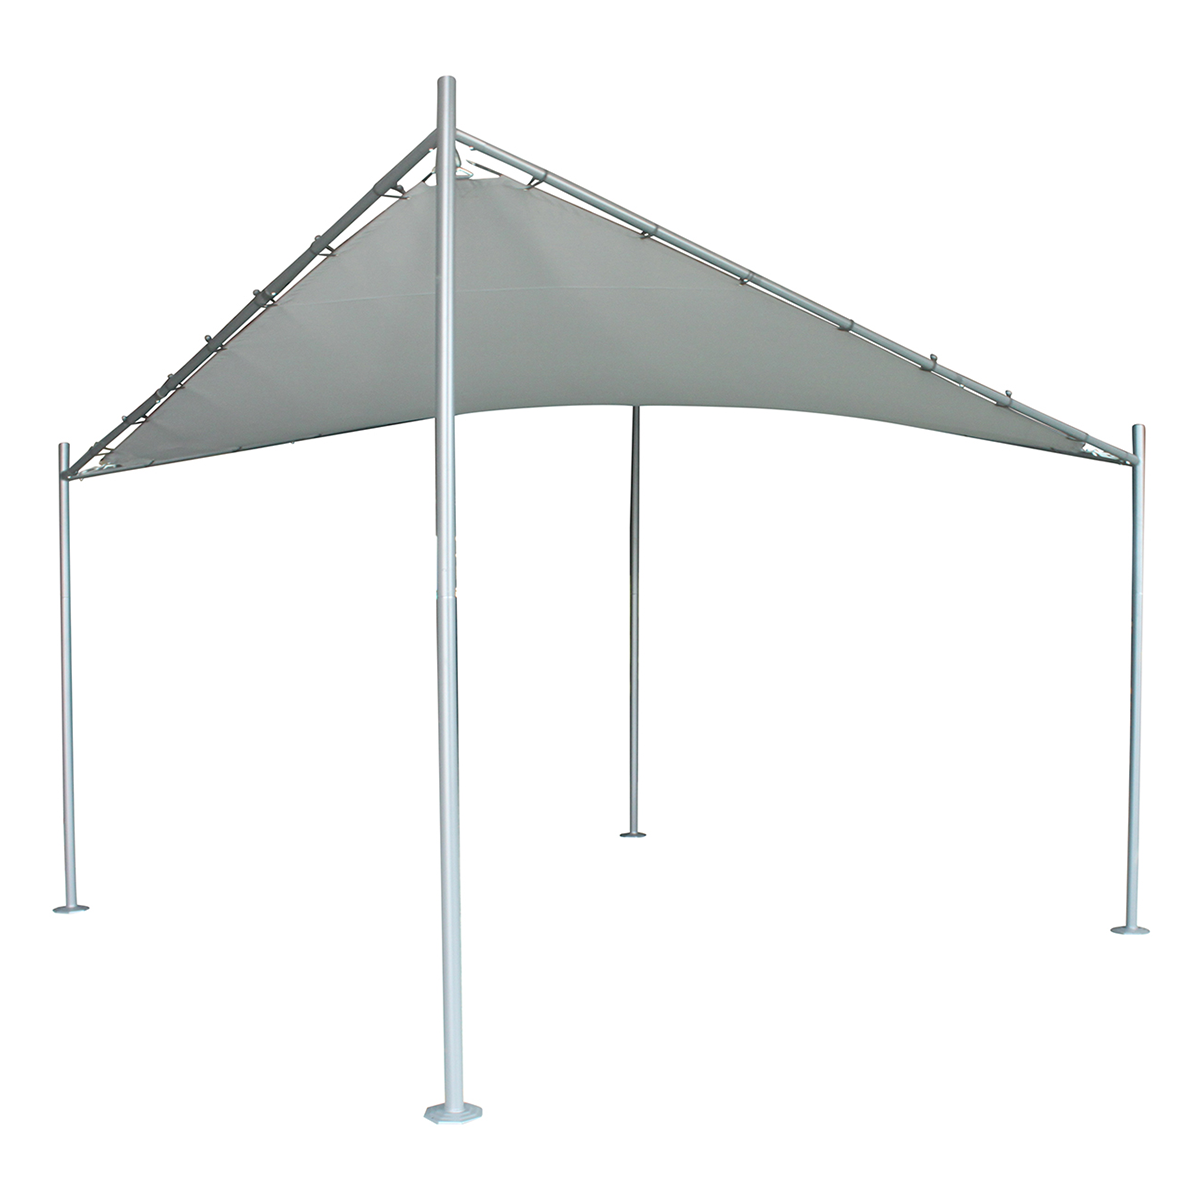 Awning Replacement for Rodin 3.5m Sail Shade (Grey)